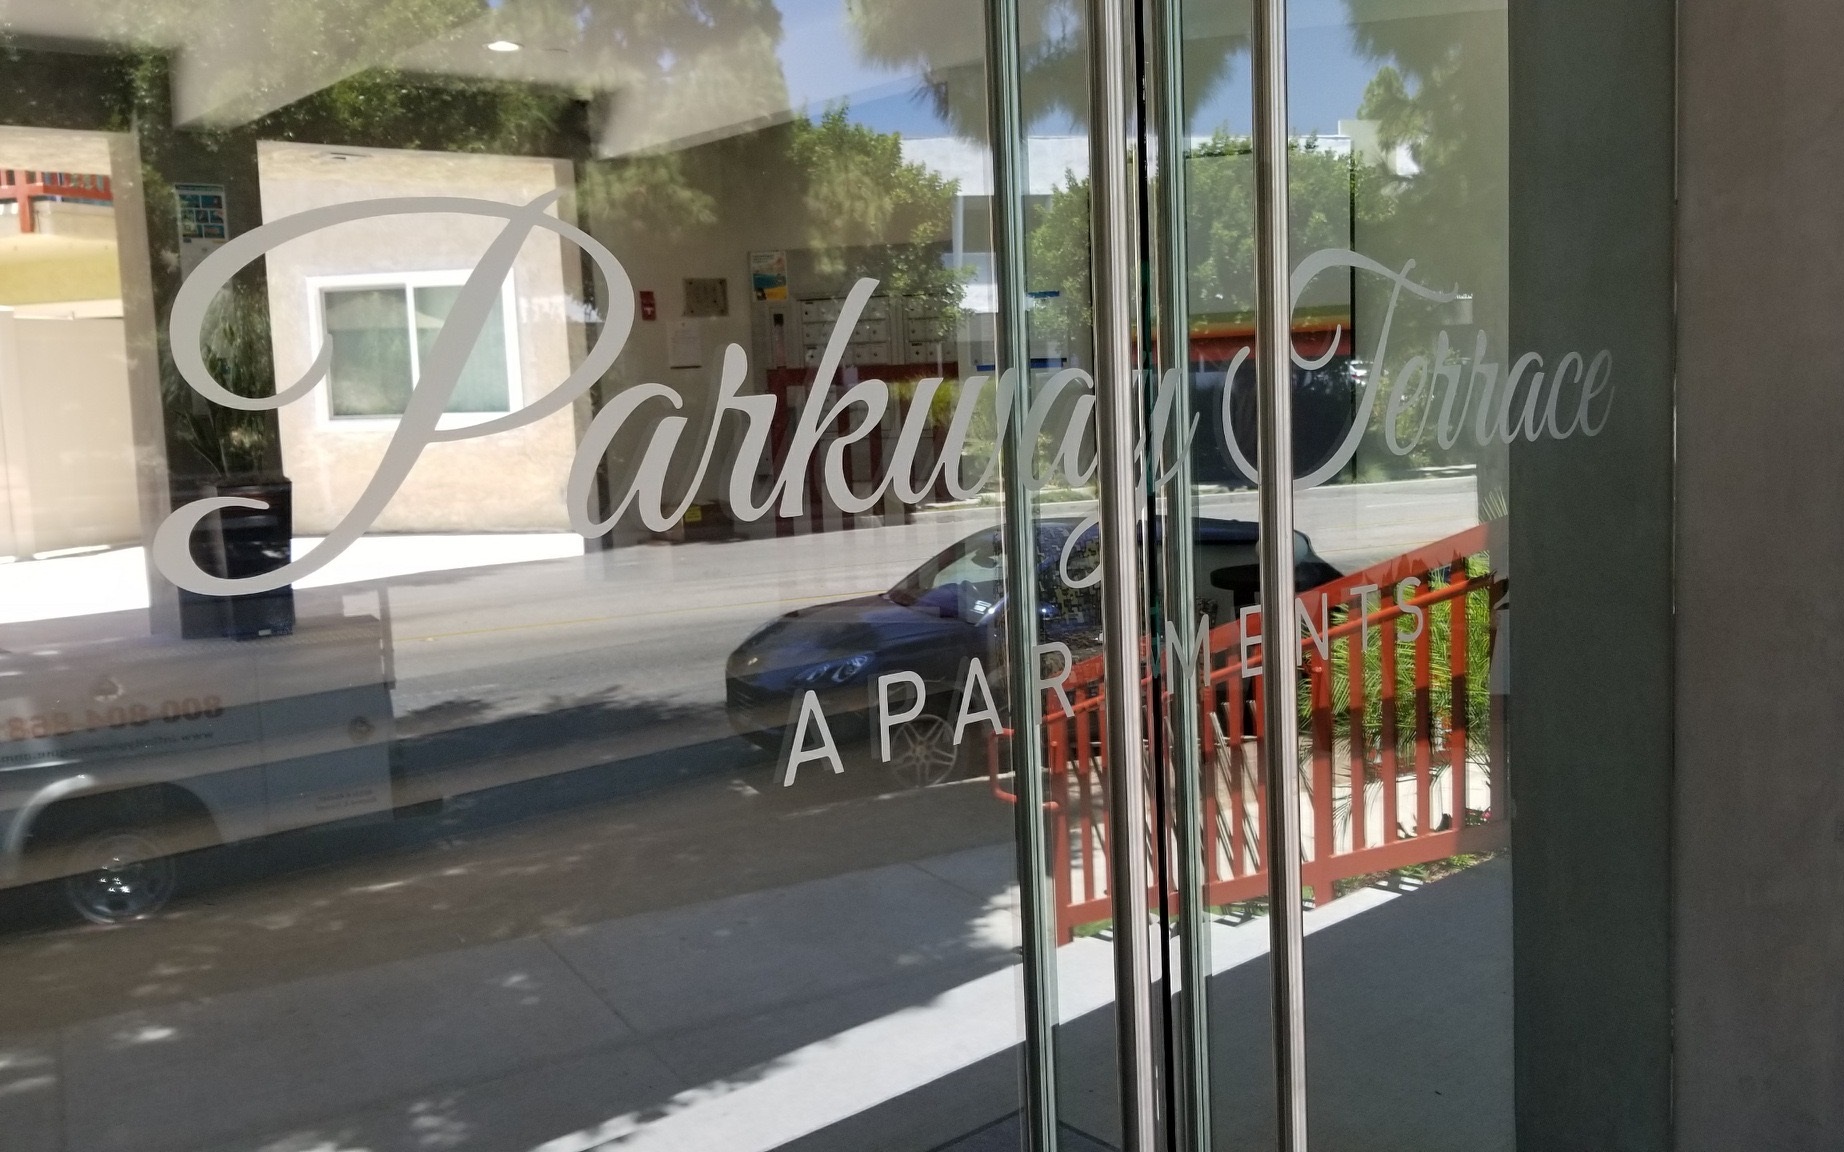 Our etched glass vinyl entrance sign for Parkway Terrace in Culver City. So the apartment will look more welcoming for potential tenants